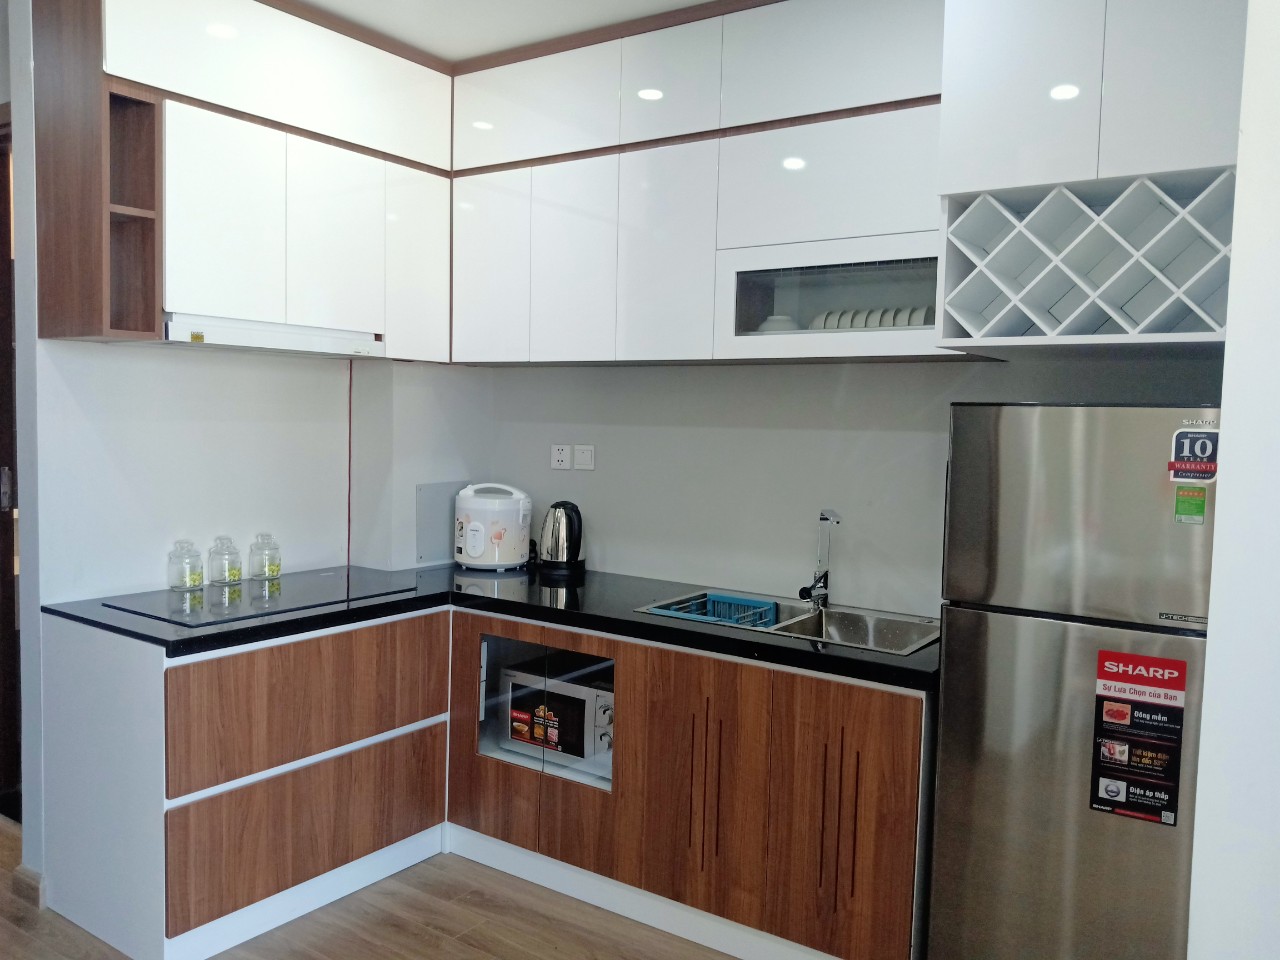 Virgo Nha Trang Apartment for rent | 2 bedrooms | 12 million